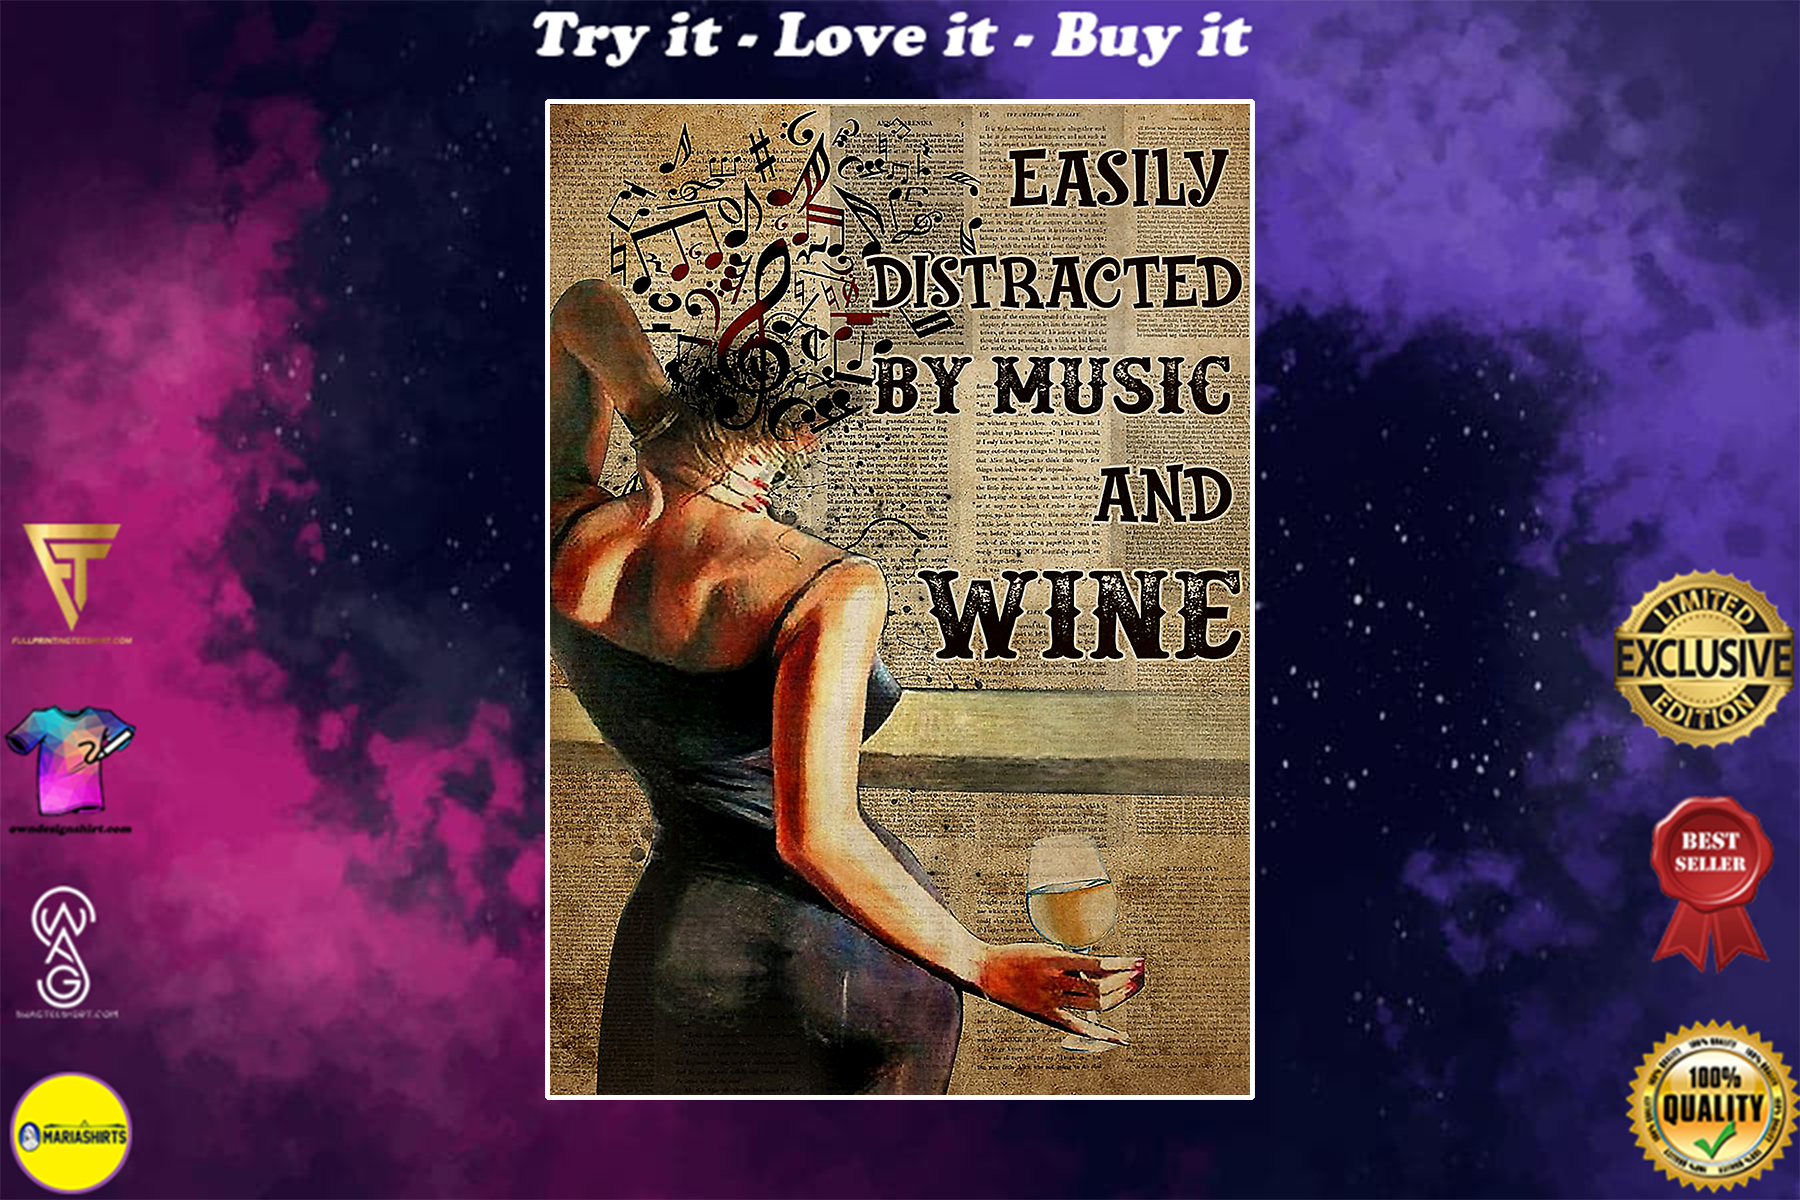 easily distracted by music and white wine book page vintage poster